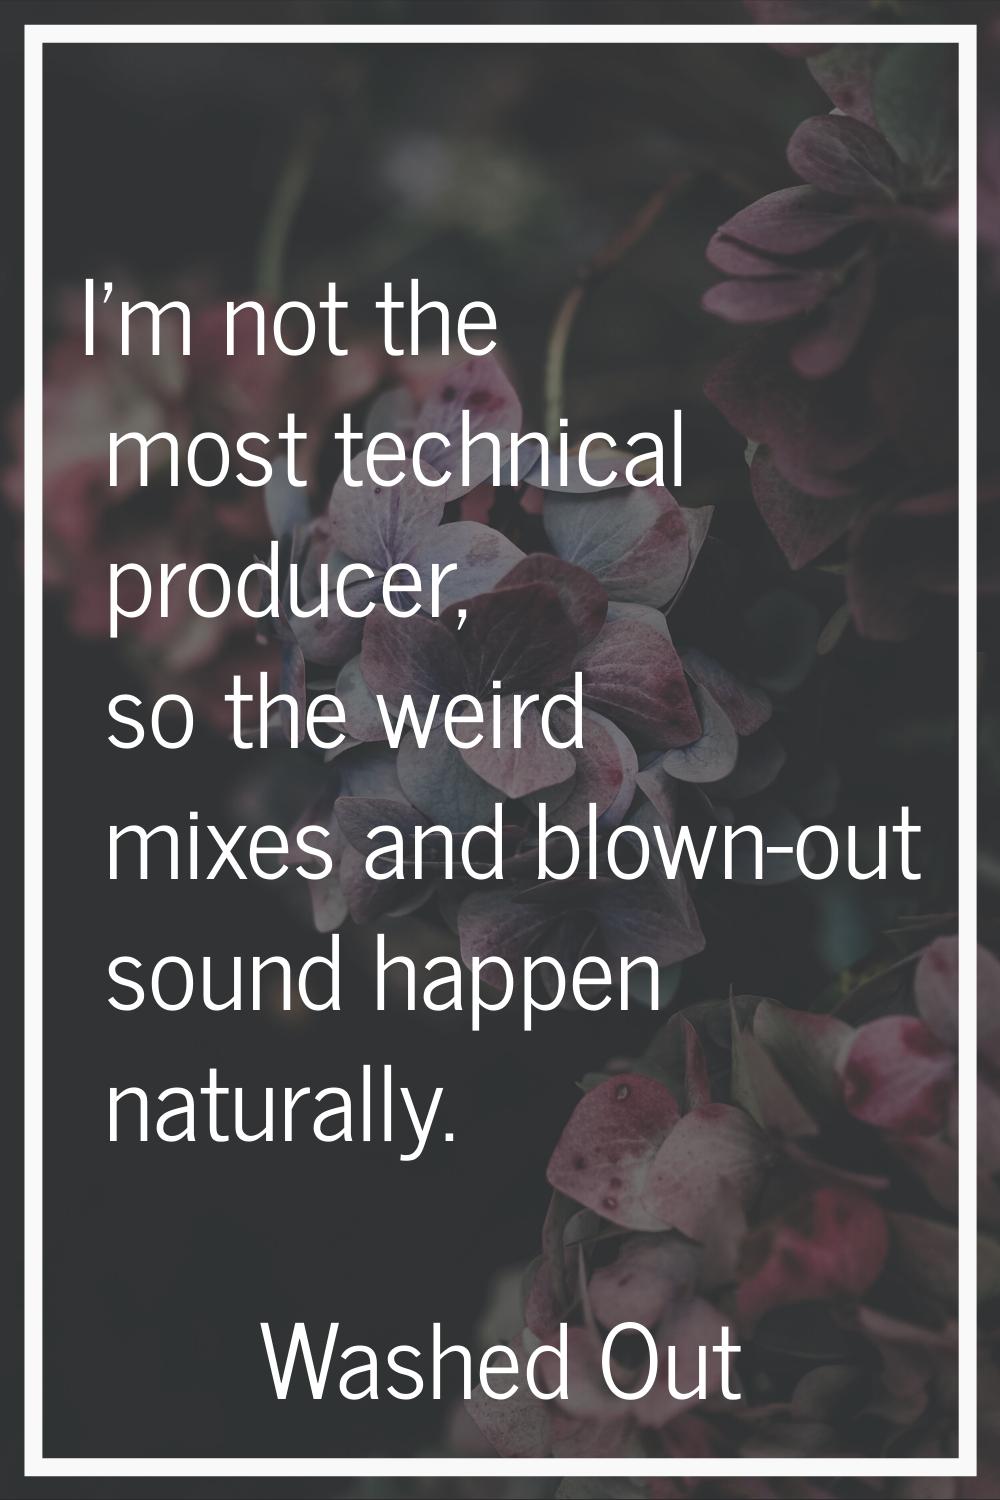 I'm not the most technical producer, so the weird mixes and blown-out sound happen naturally.